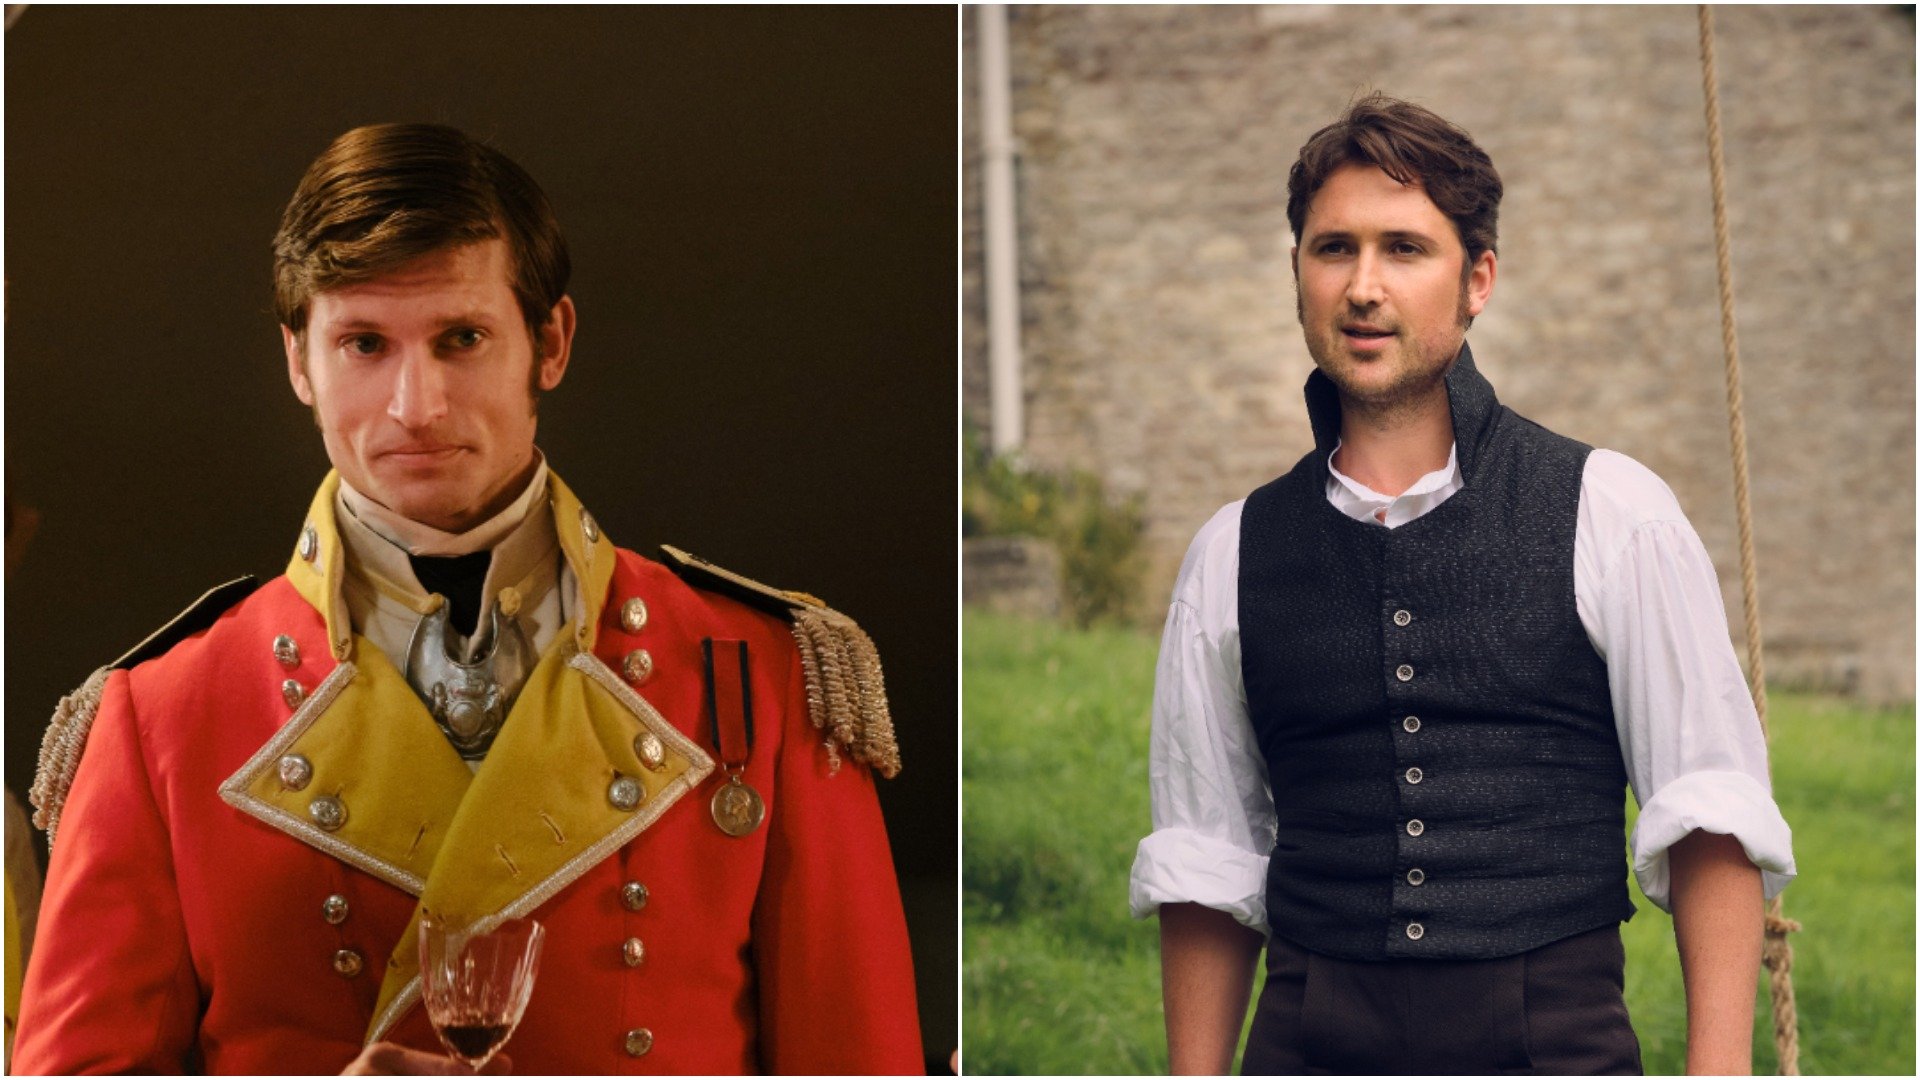 Side-by-side photos of Lennox in red military jacket and Colbourne in white shirt and vest from 'Sanditon' Season 2